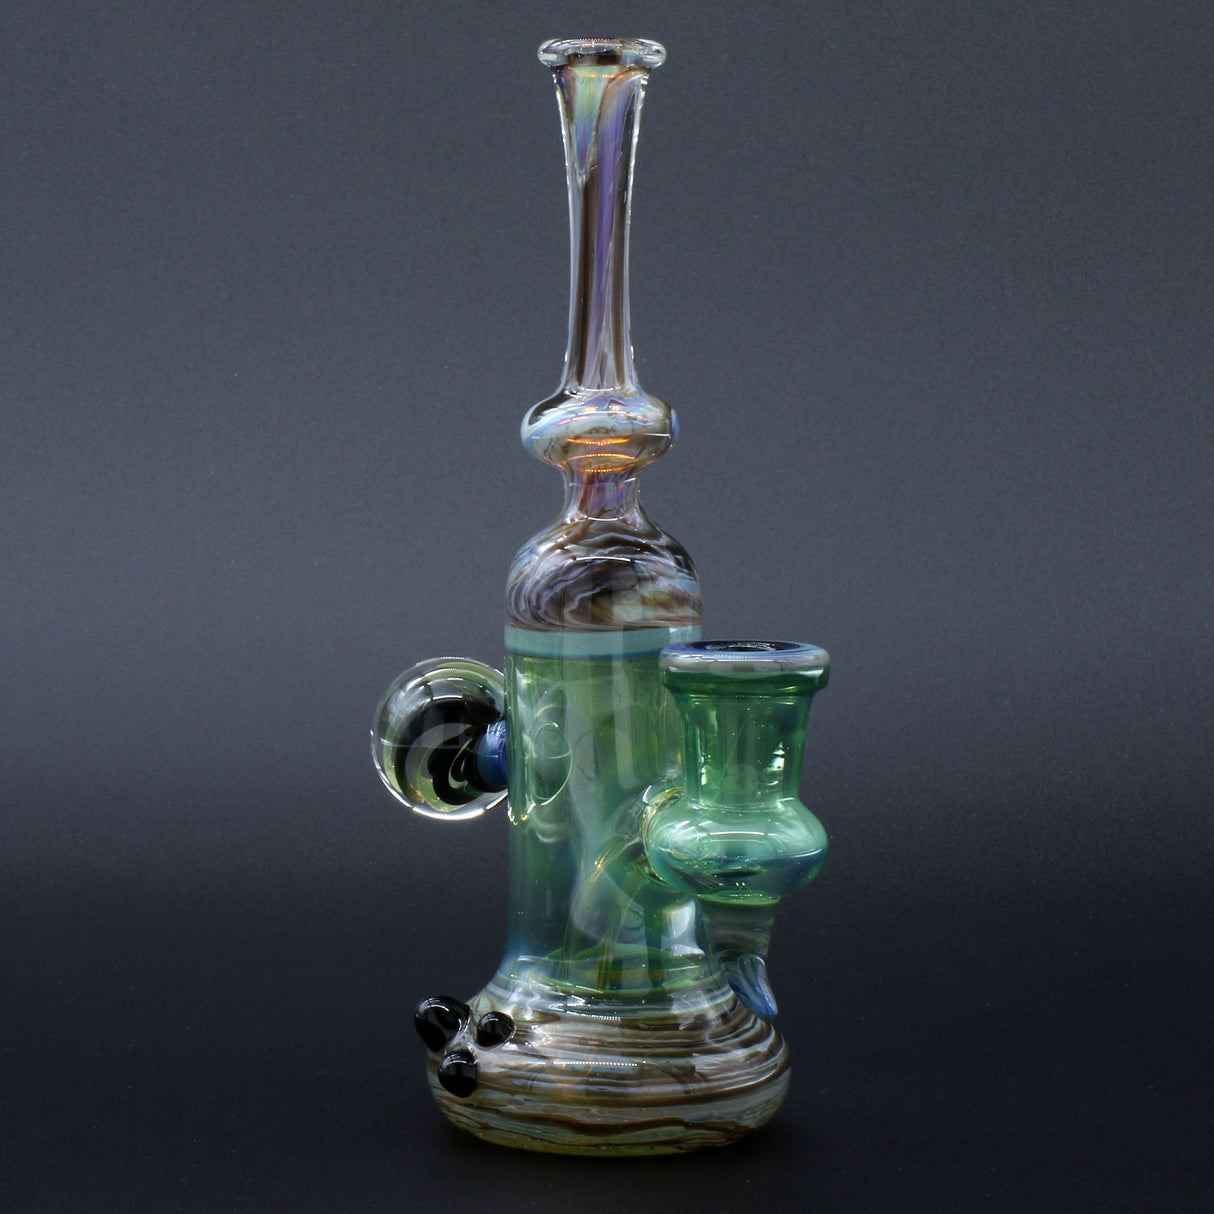 Clayball Glass "Enclave Nebula" Heady Sherlock Dab-Rig with intricate designs, front view on a dark background